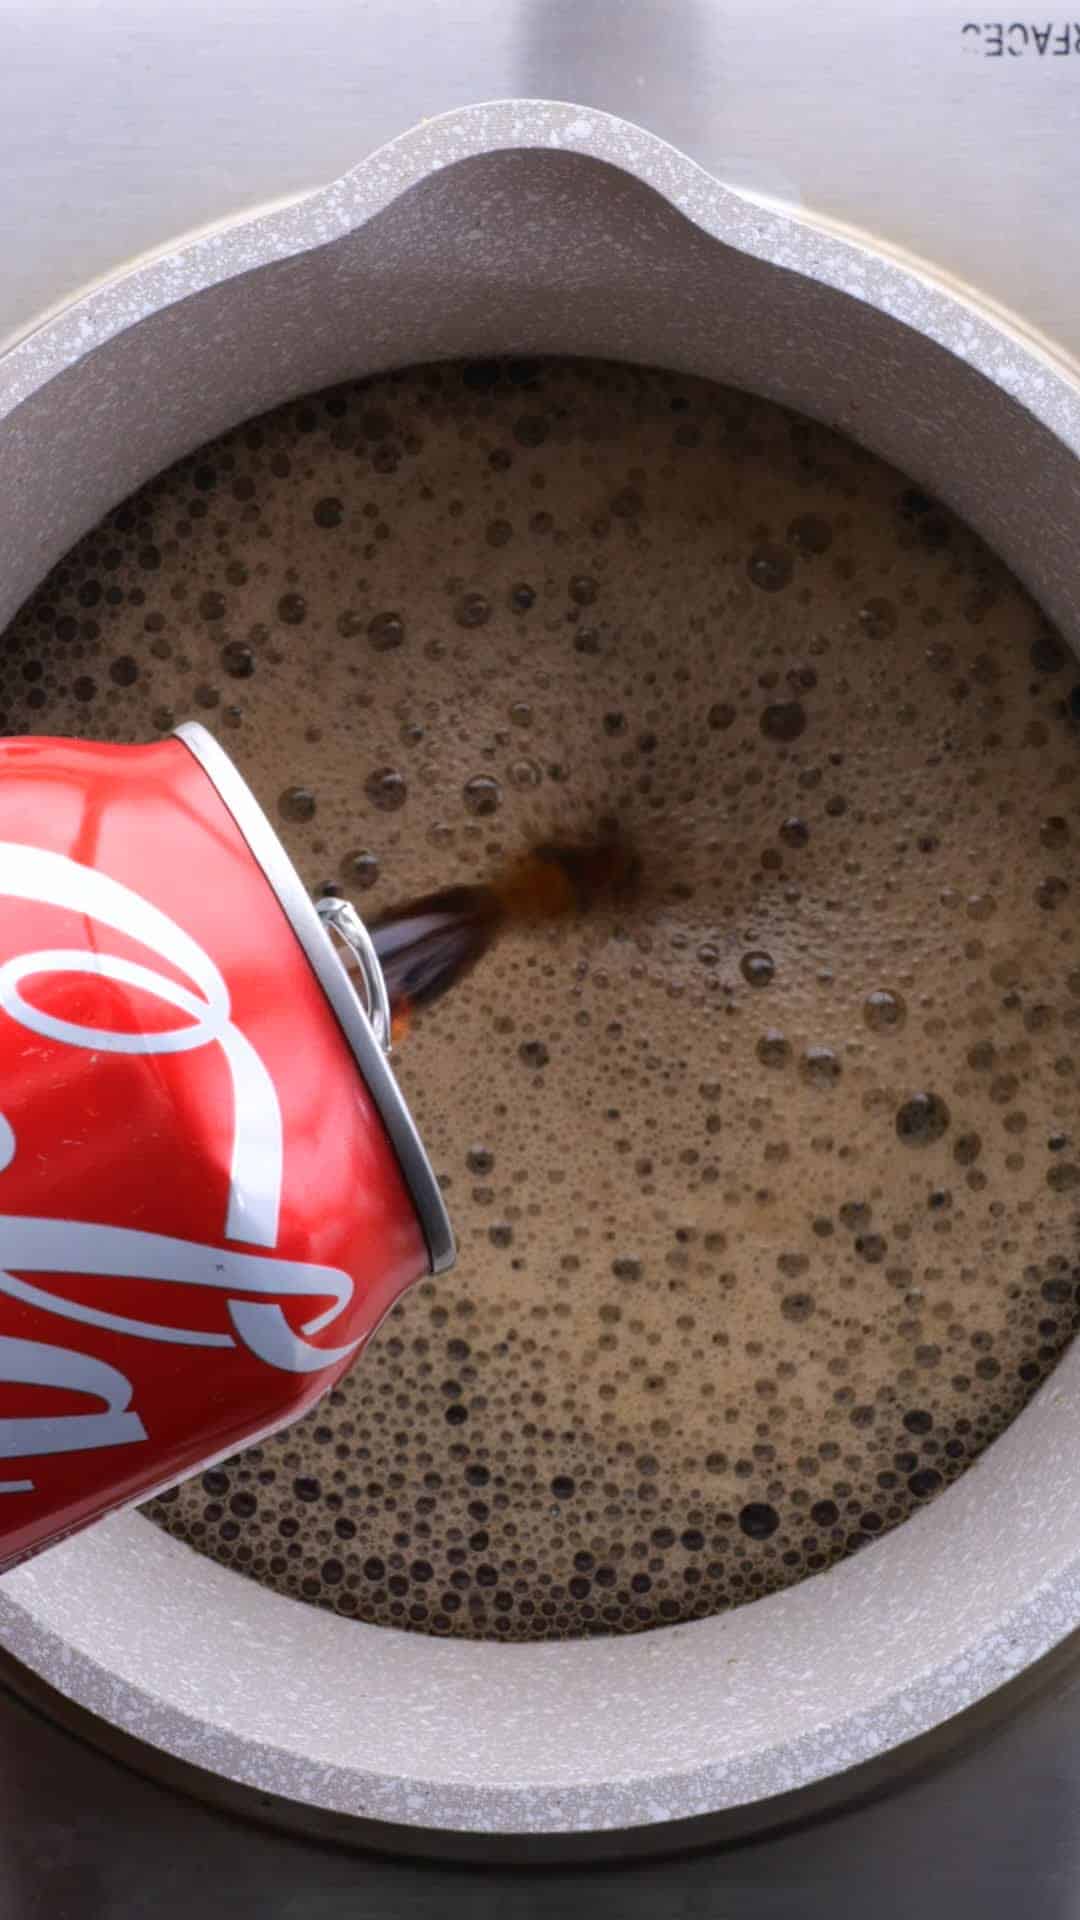 Coca-Cola being poured into a mixing bowl